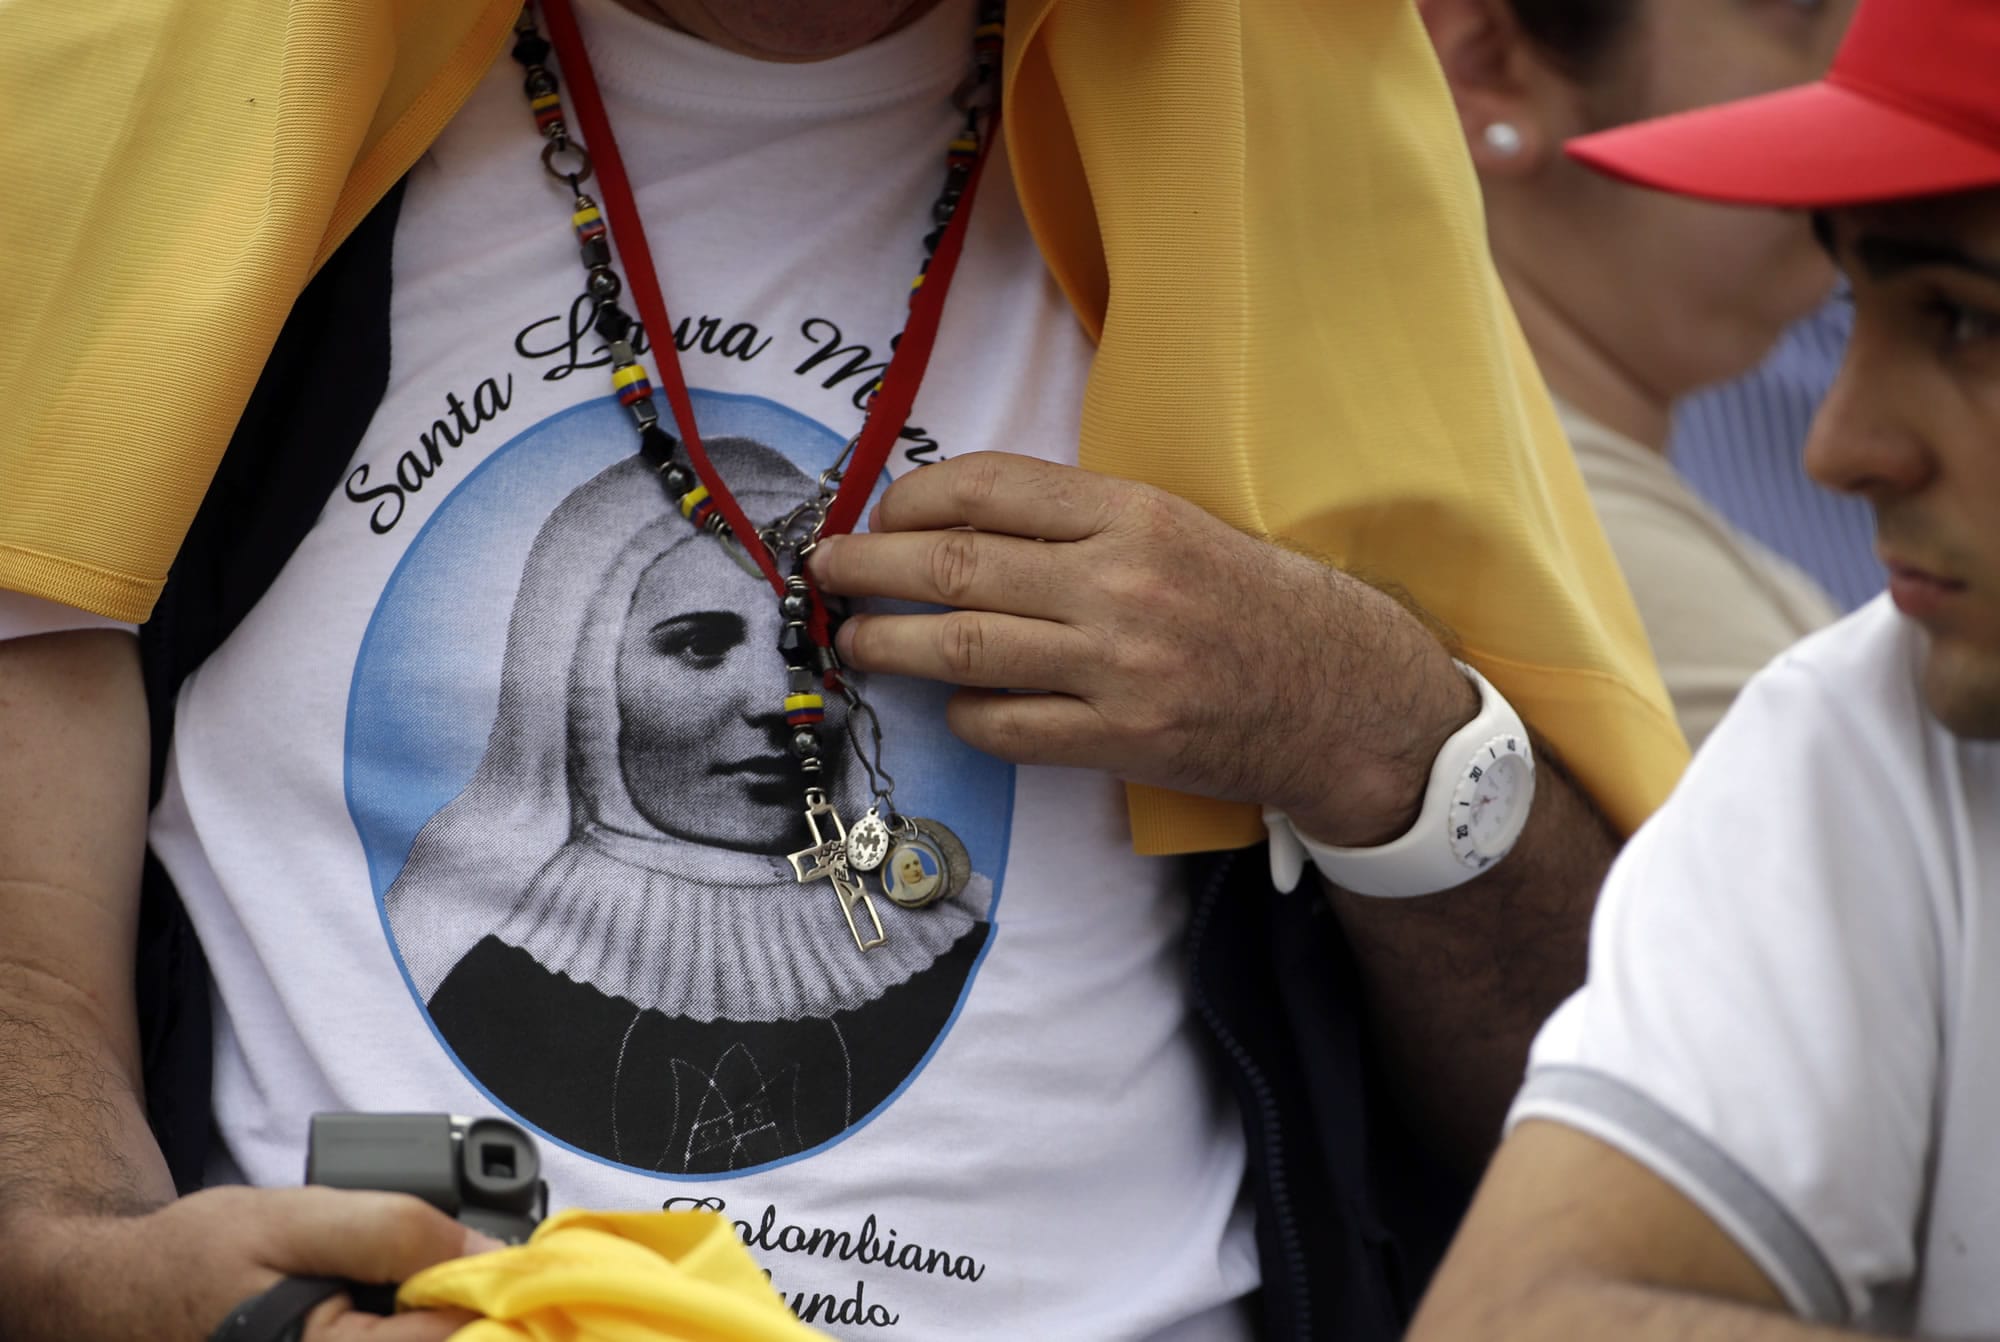 A member of the crowd wearing a shirt with a portrait of Laura di Santa Caterina da Siena Montoya of Colombia waits for the arrival of Pope Francis for a canonization Mass in St.